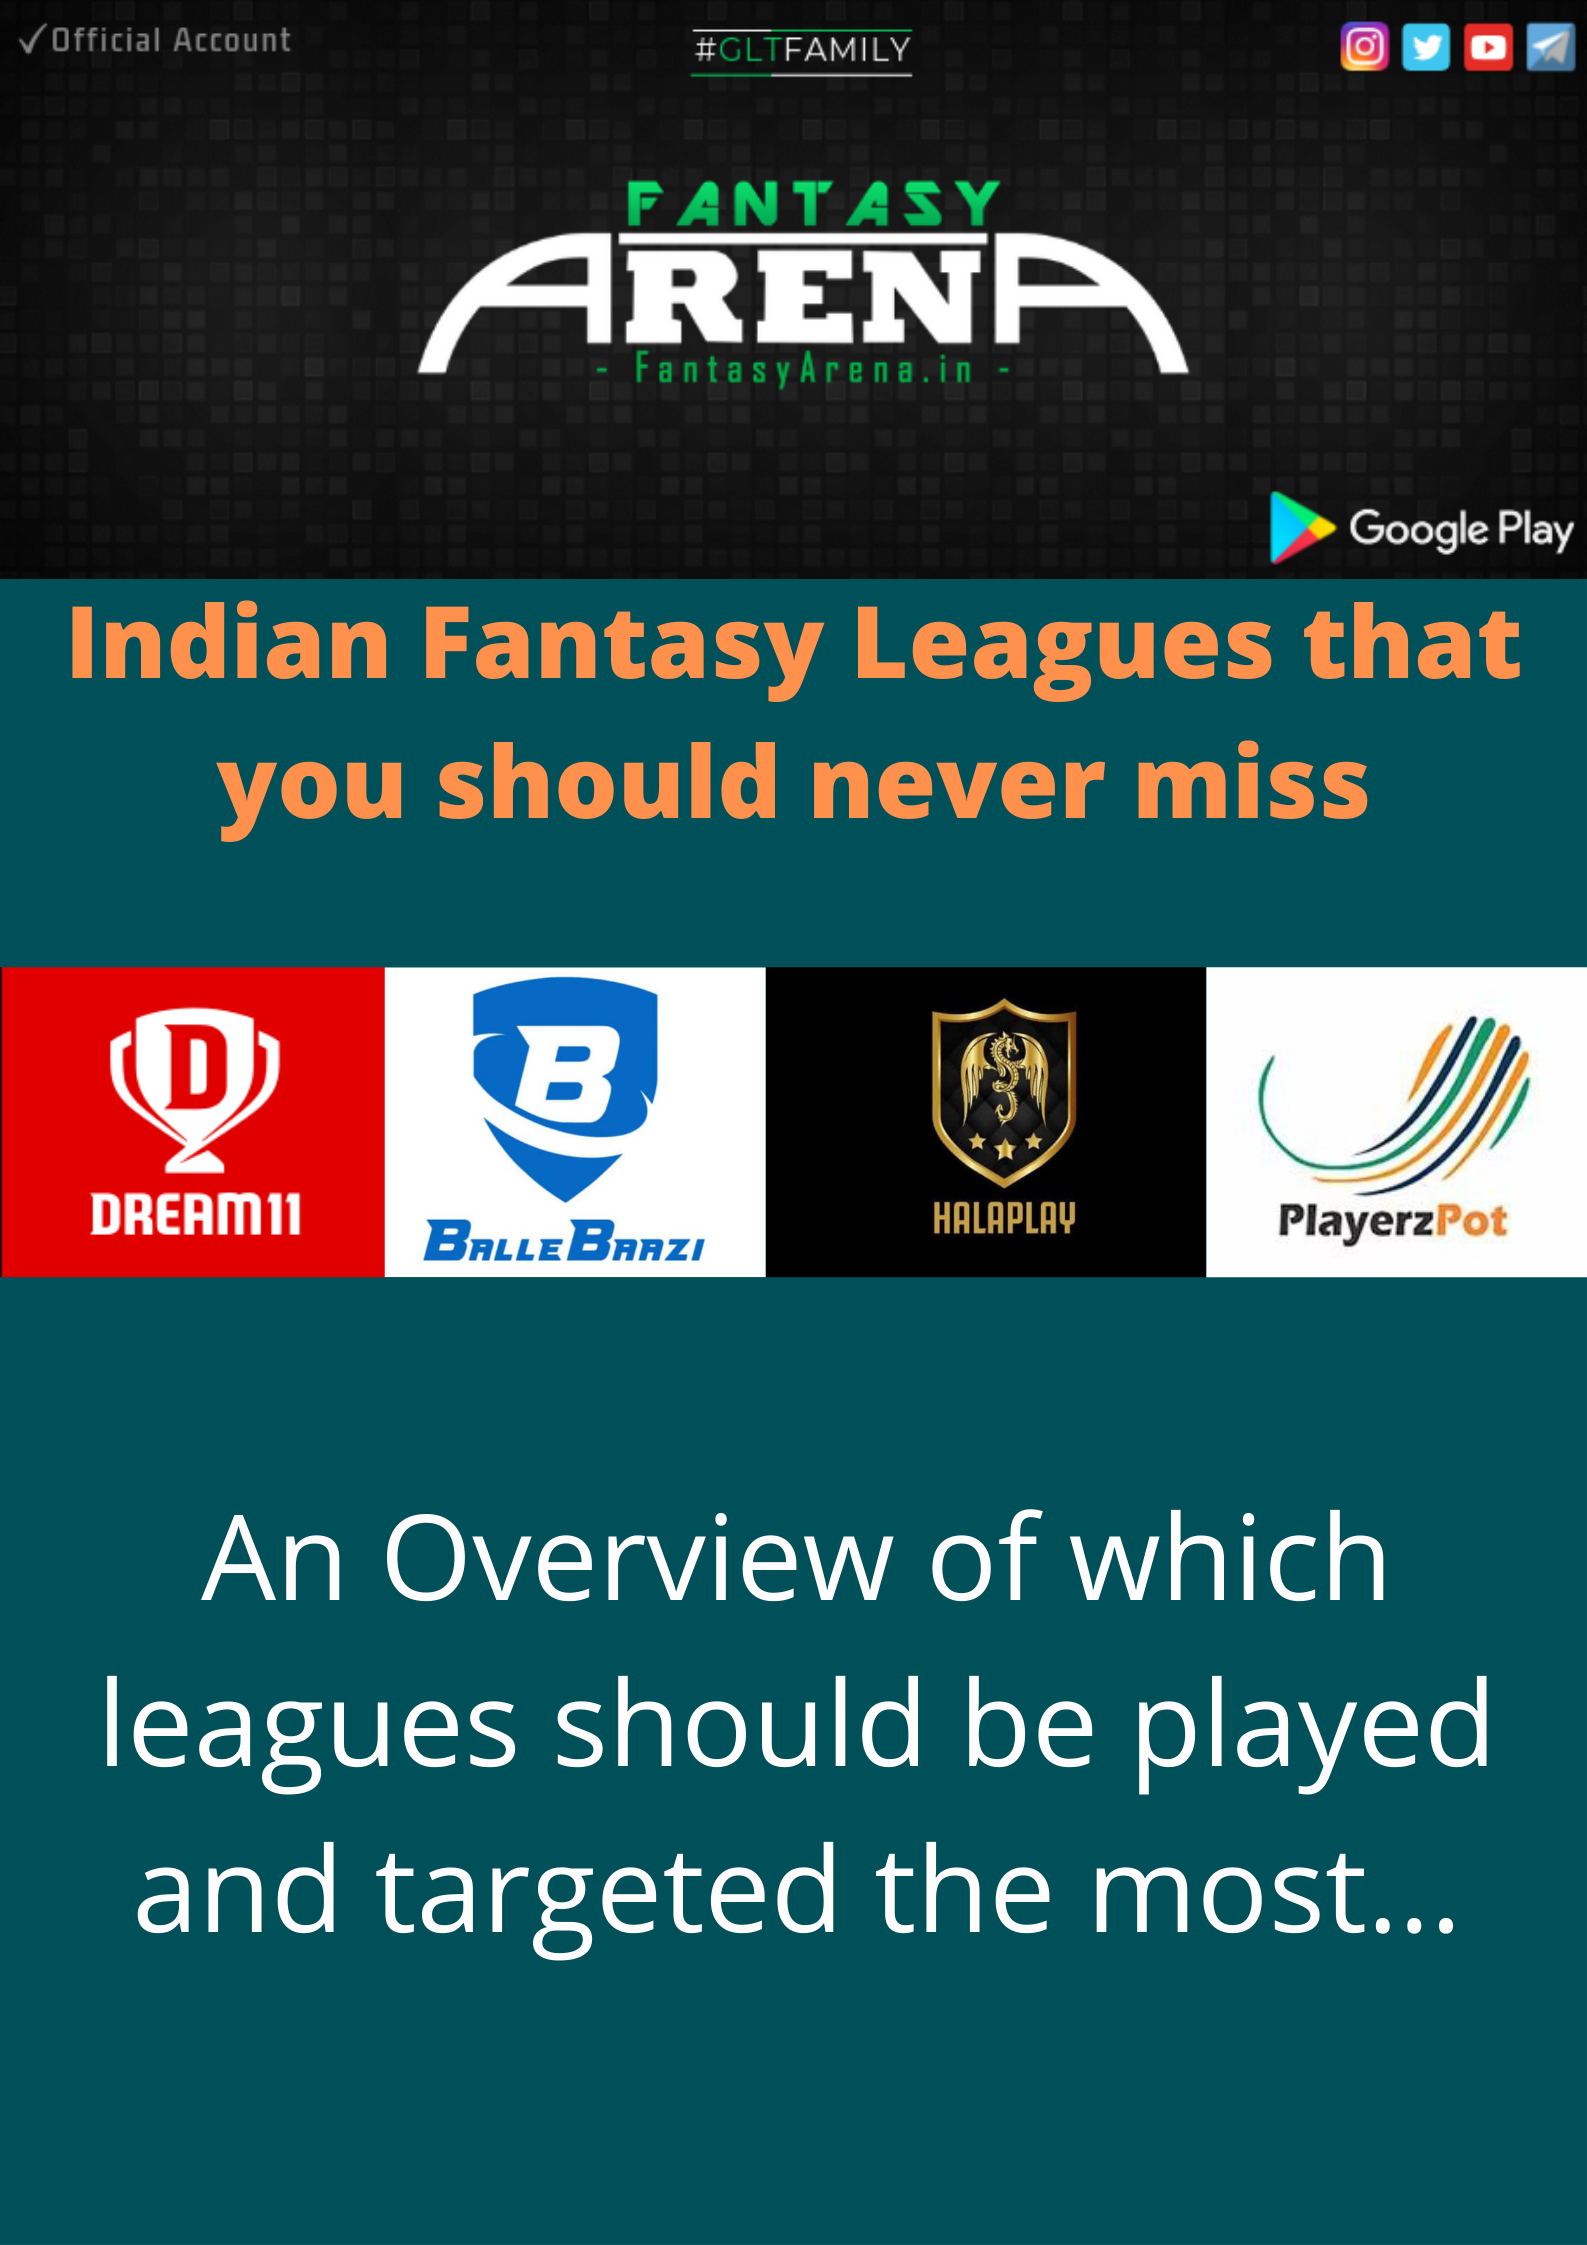 Indian Fantasy Cricket Leagues that you should never miss.